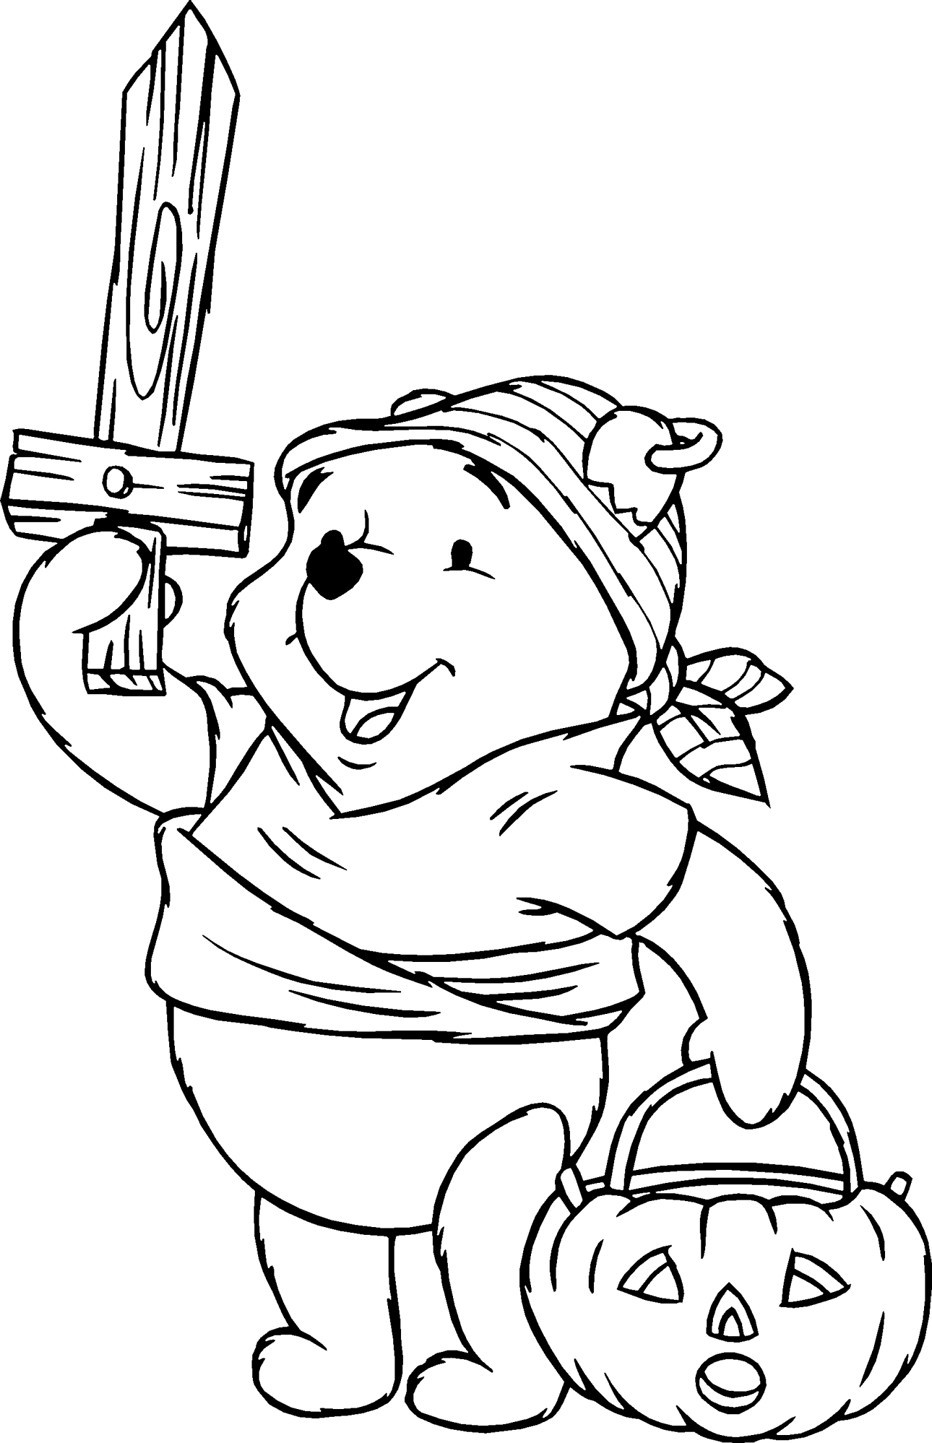 Halloween Coloring Pages For Kids Free
 24 Free Printable Halloween Coloring Pages for Kids